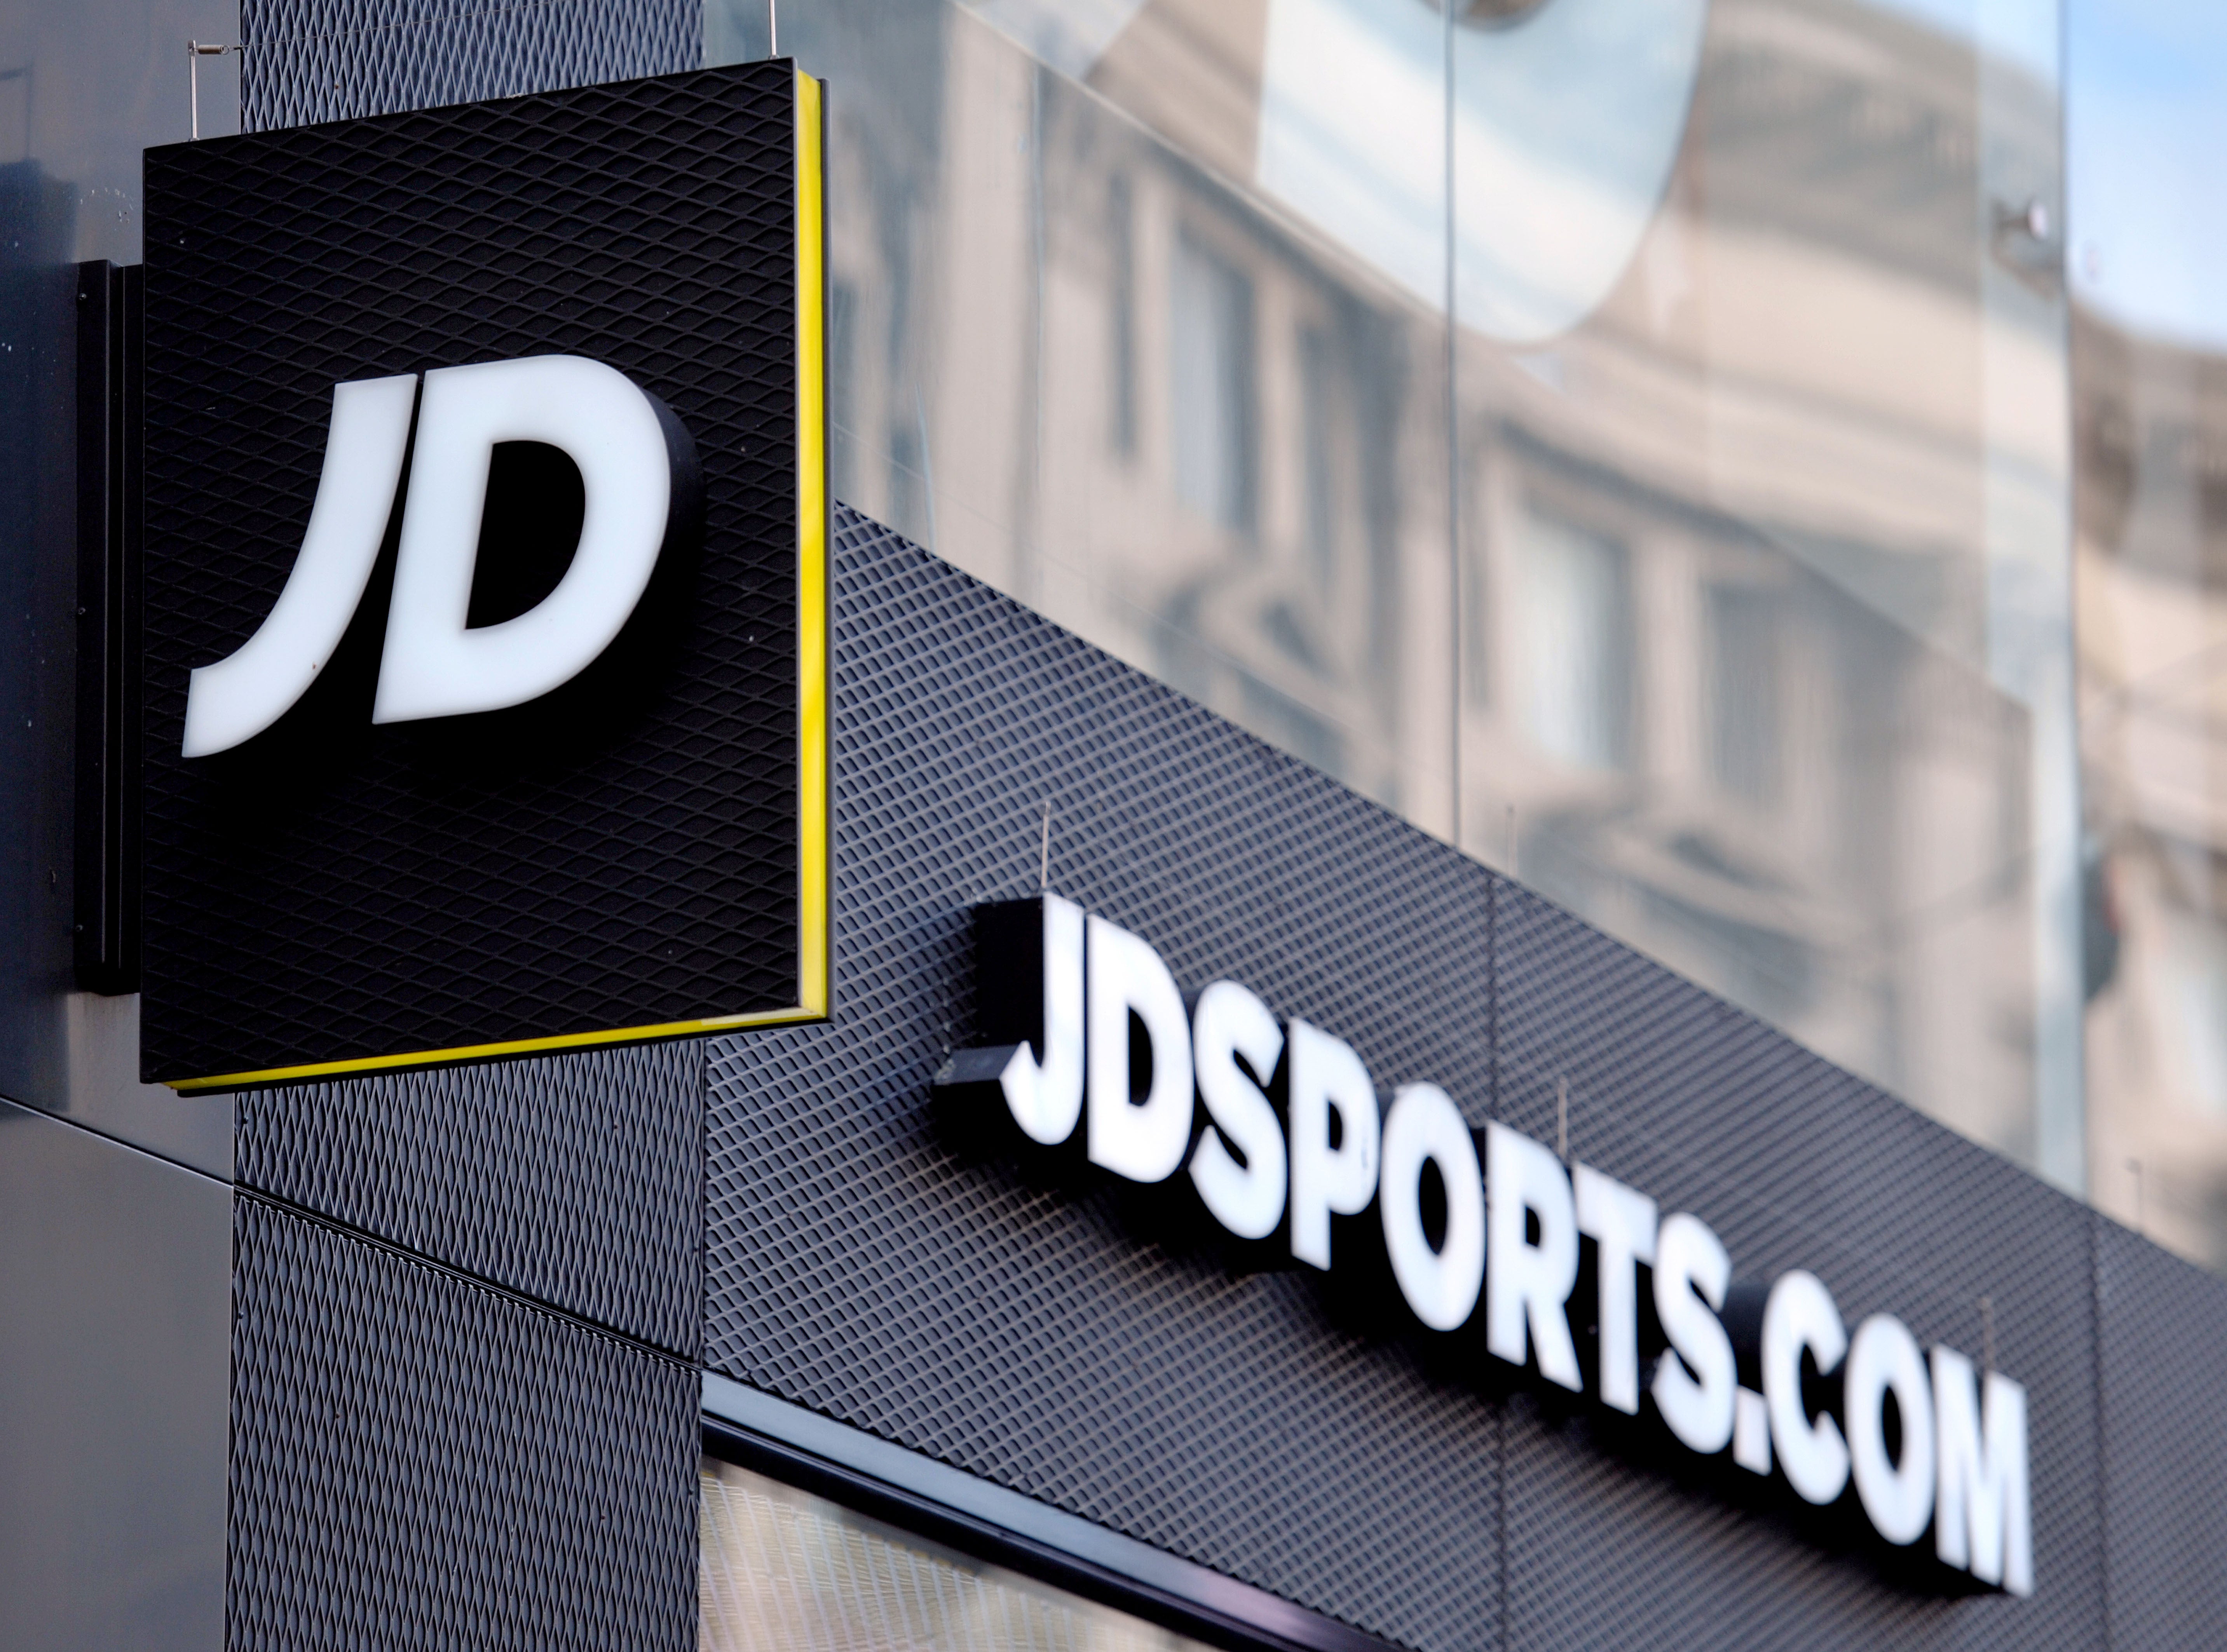 Retailer JD Sports Fashion has agreed a deal to sell Footasylum for £37.5 million after being ordered to offload the footwear firm by the UK’s competition watchdog (Nicholas Ansell/PA)